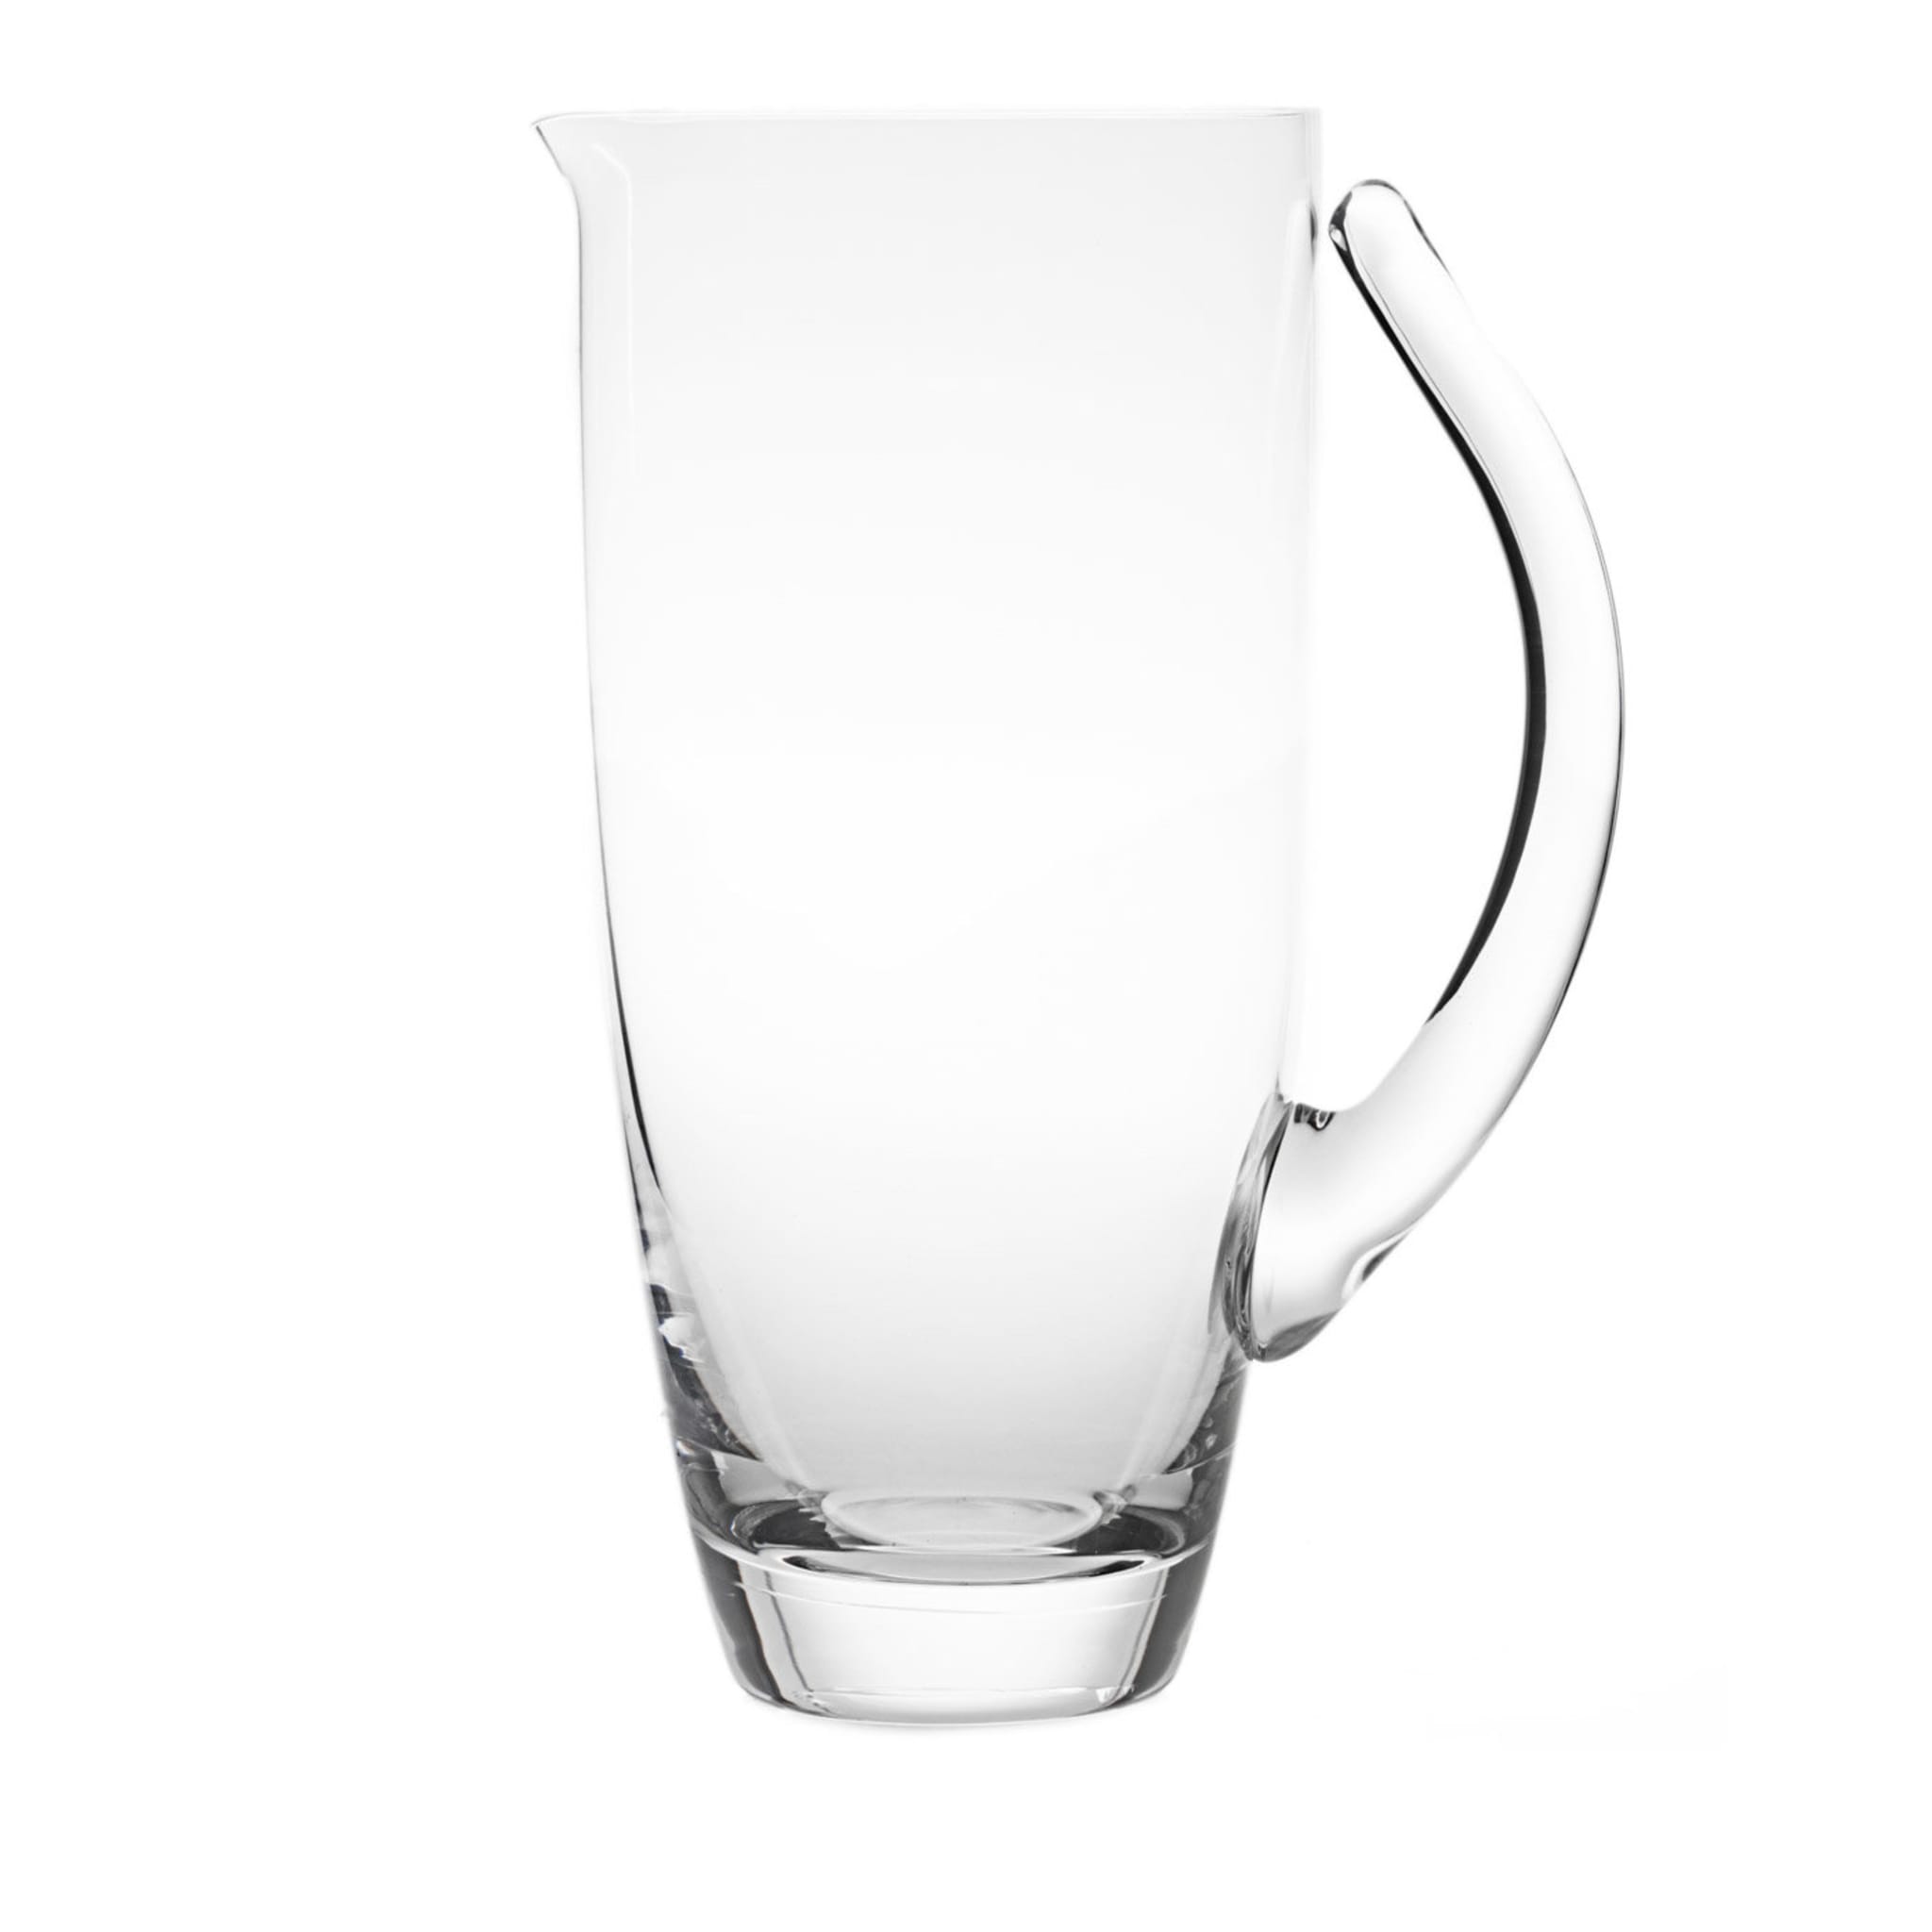 Collier Crystal Pitcher - Alternative view 1